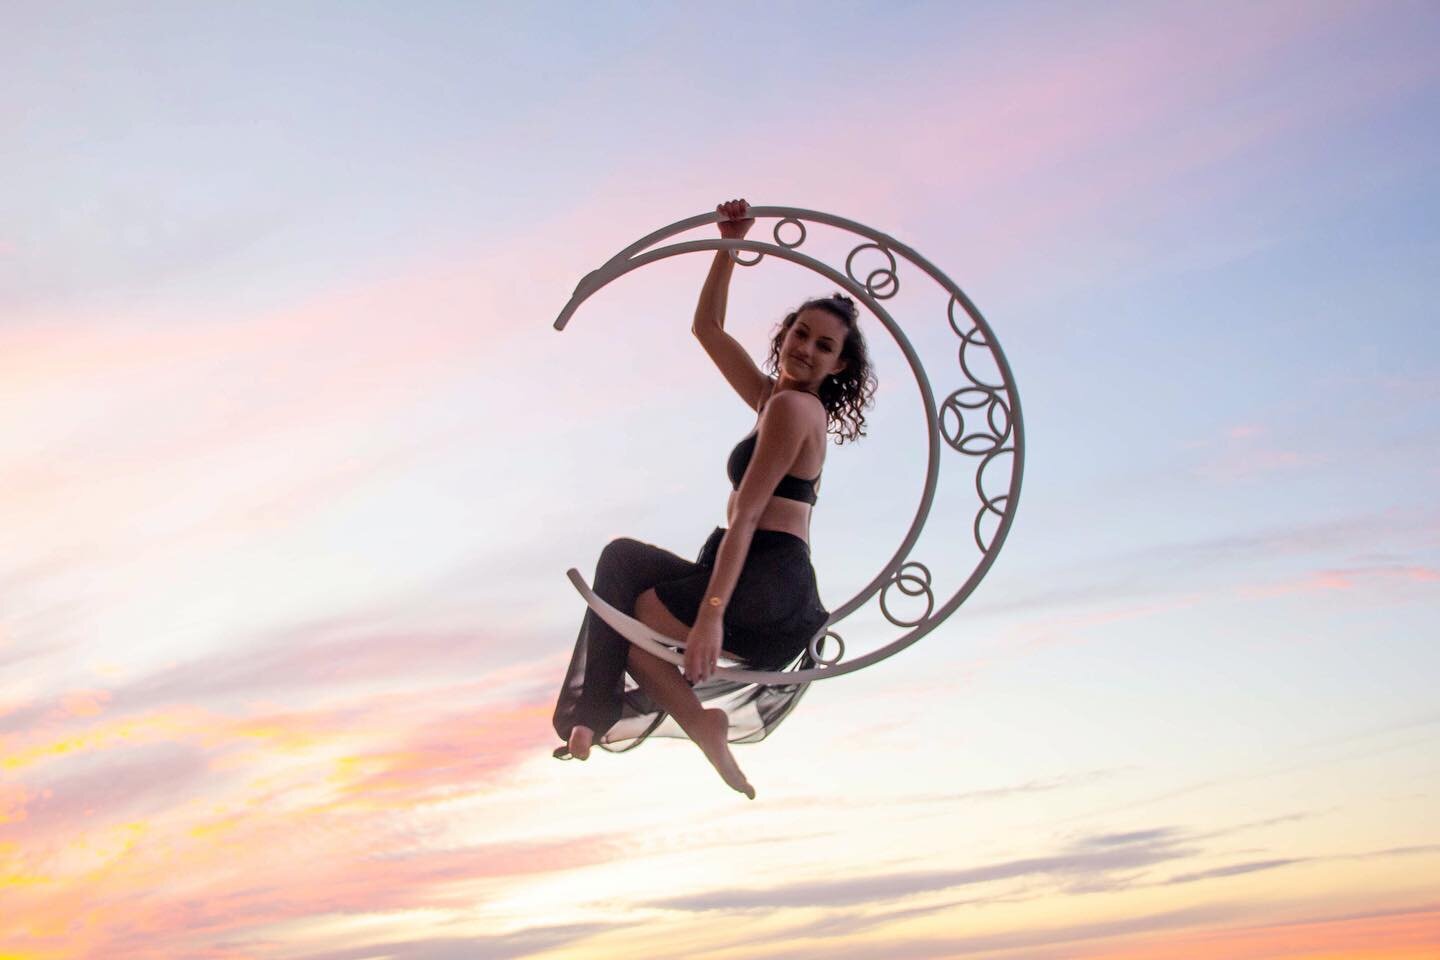 I hope that you succeed in making even your wildest dreams come true. 
That is all. 
✨✨✨

#aerialistsoutdoors #aerialists #aerialistofig #aerialmoon #aeriallyra #aerialartsphotography #aerialistphotography #keepdreaming #keepdreamingbig #holdingspace